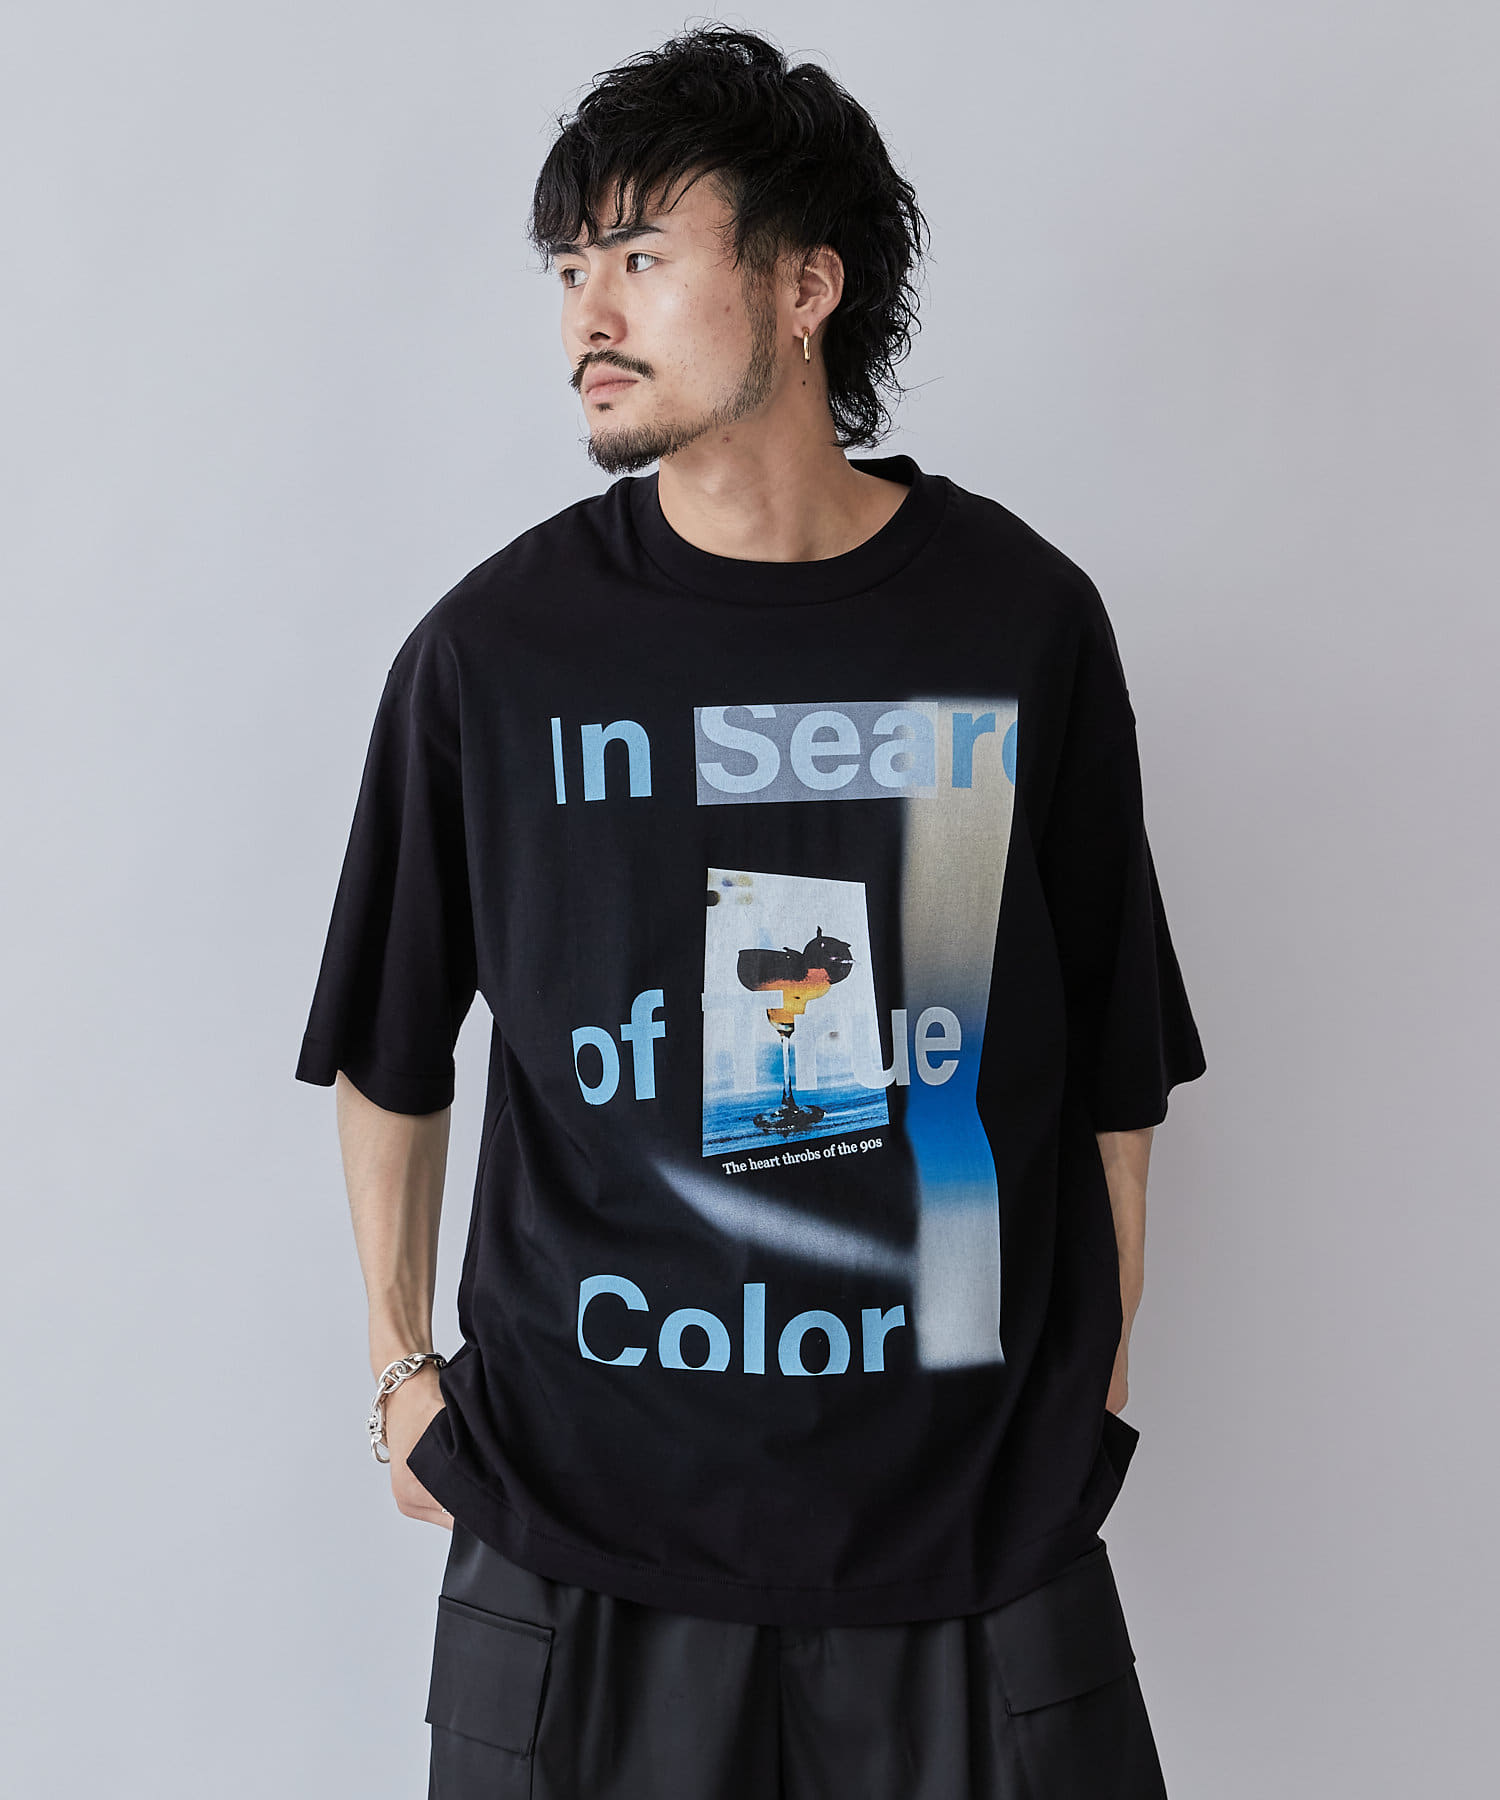 Lui's(ルイス) “COCKTAIL” プリントTシャツ